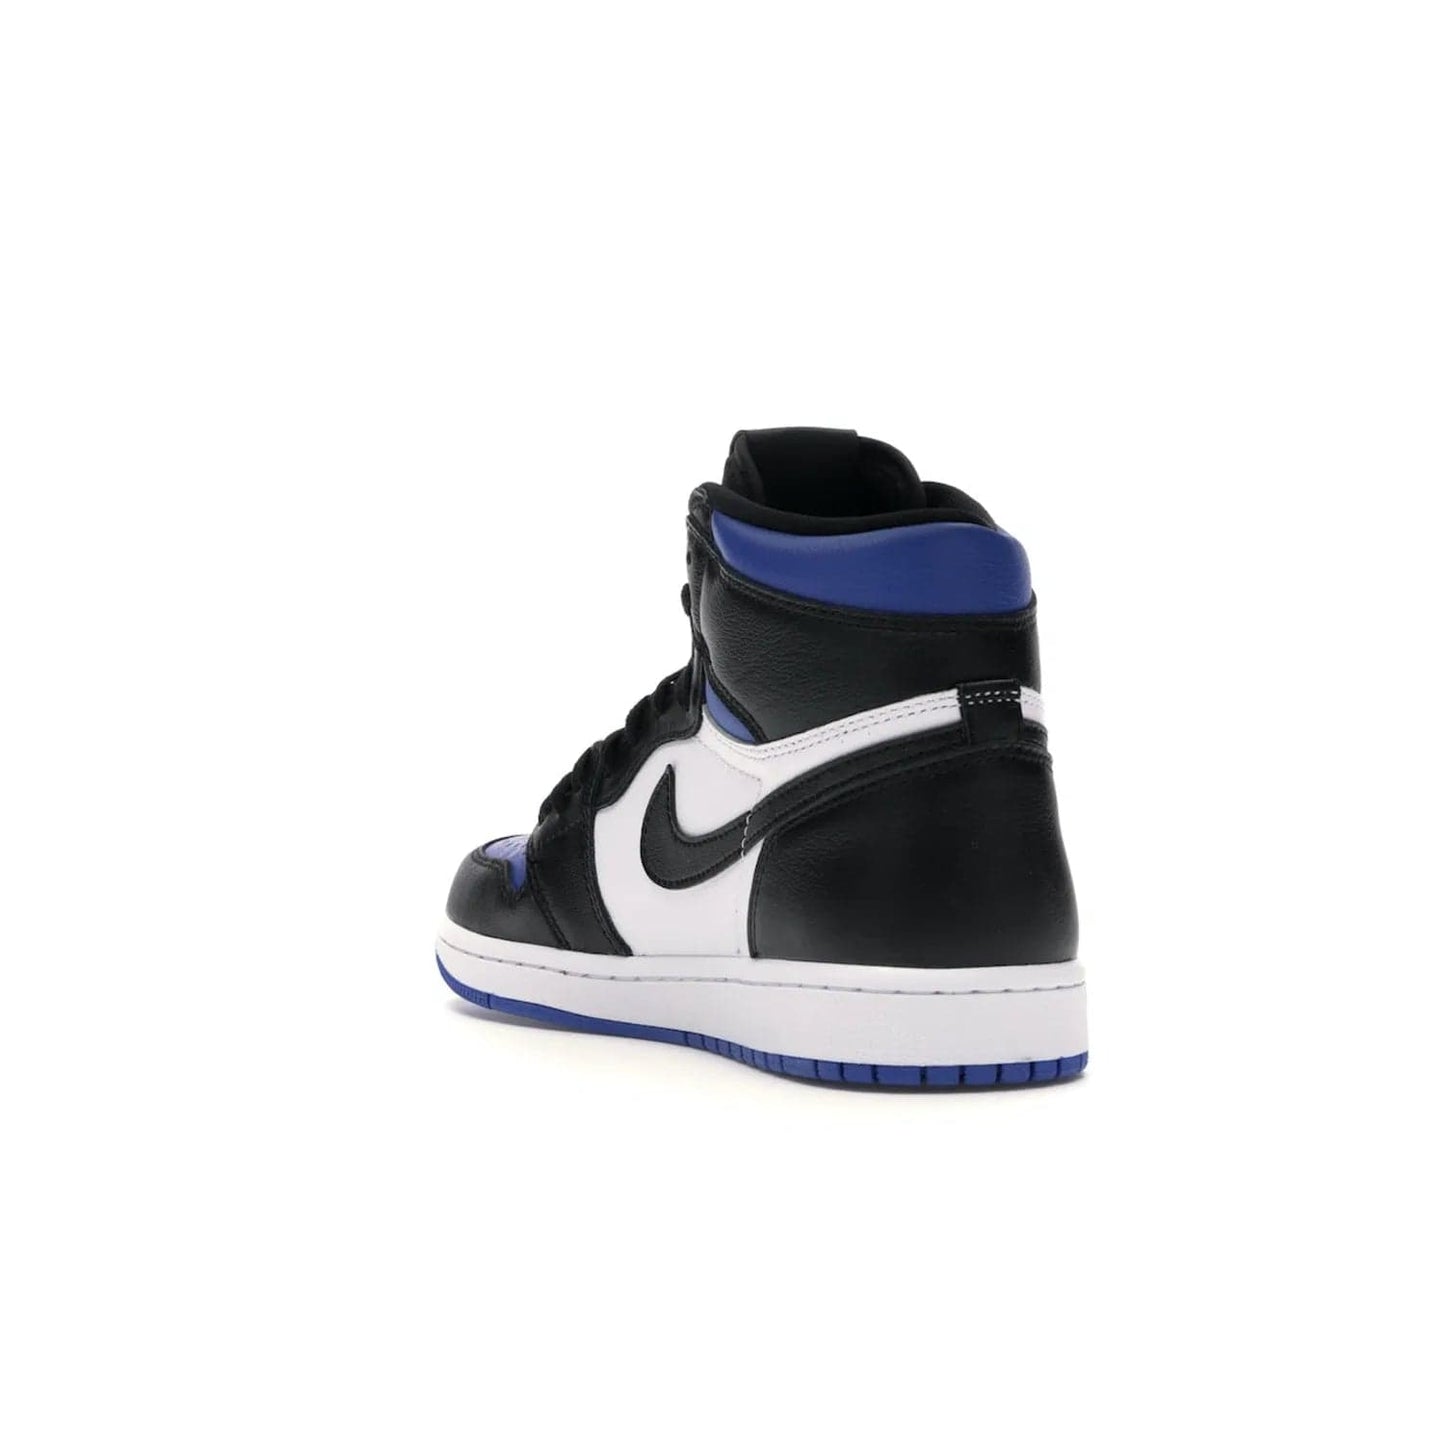 Jordan 1 Retro High Royal Toe - Image 25 - Only at www.BallersClubKickz.com - Refresh your look with the Jordan 1 Retro High Royal Toe. This classic AJ 1 sports a white and royal leather upper, black leather overlays, and branded leather tongue tag. Pick up today and set the streets ablaze.